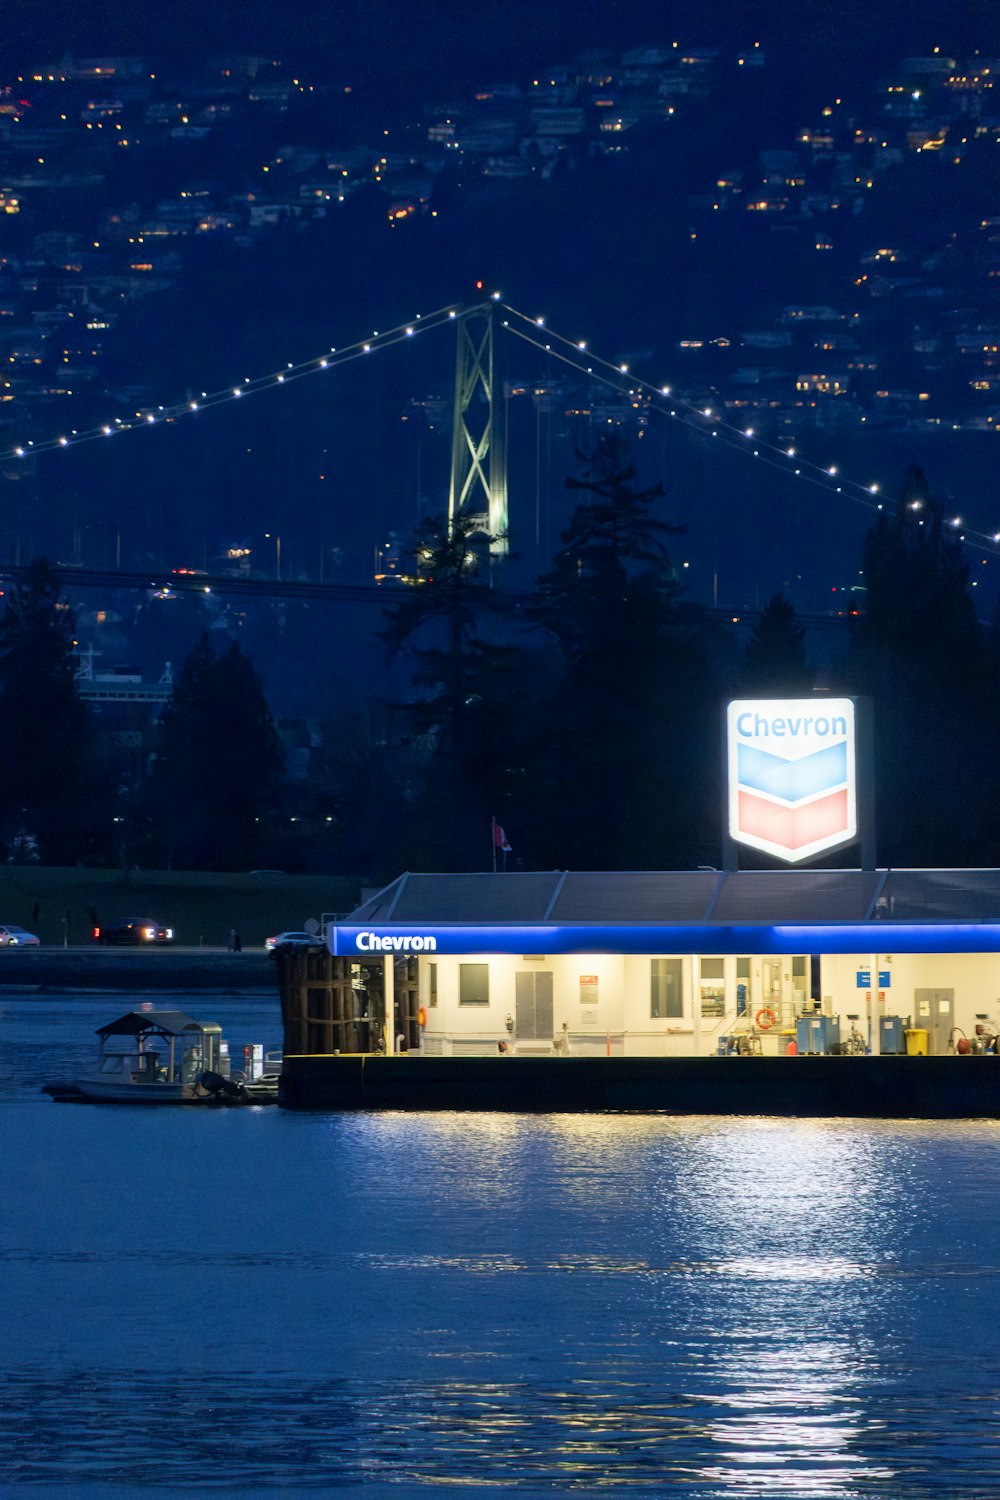 a restaurant on the water with a bridge in the background